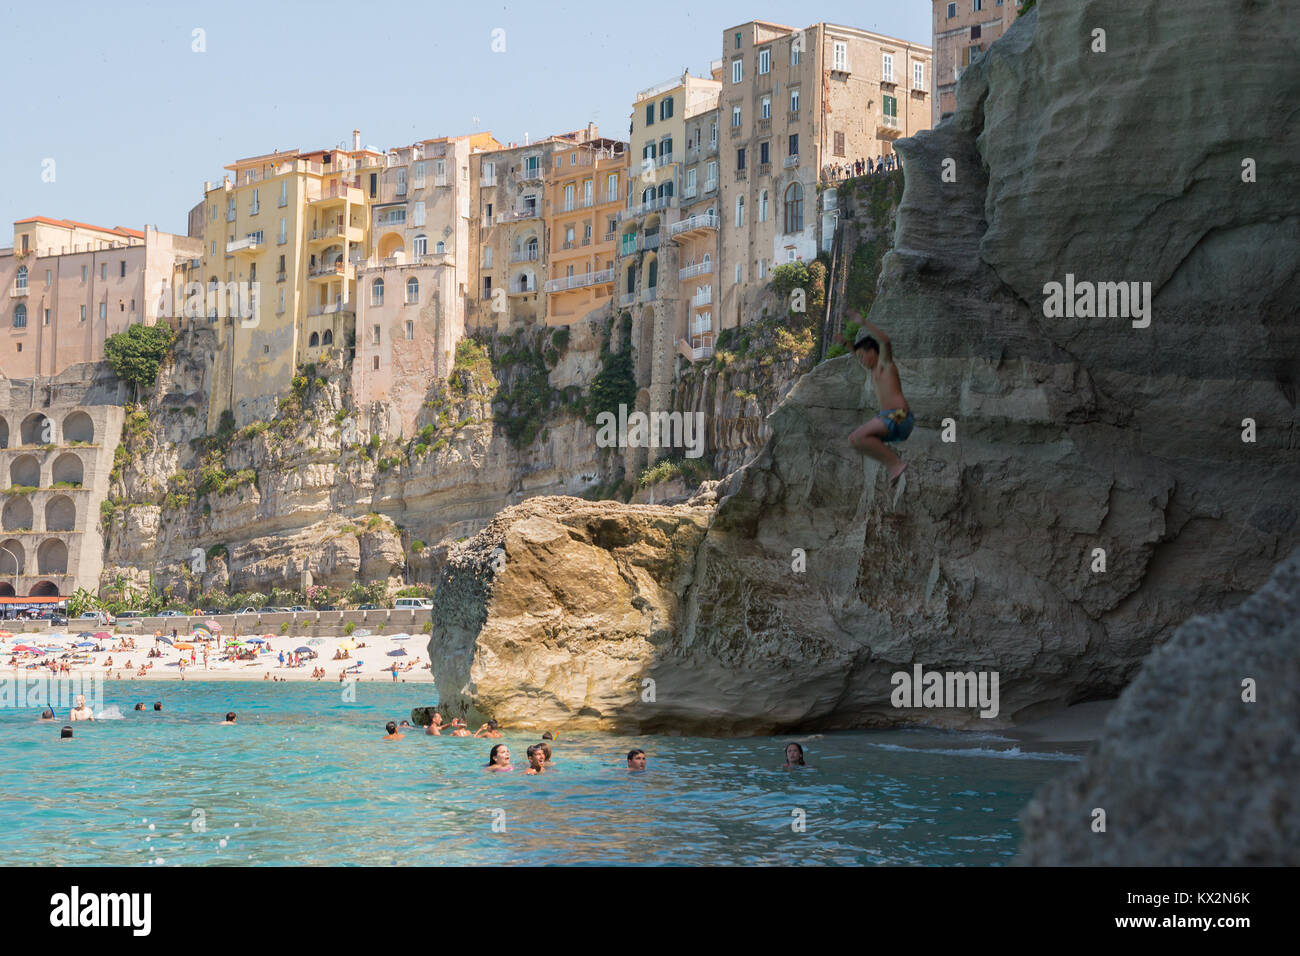 Tropea, Italy - June 2013: people swimming on the beach in popular summer destination, Tropea, Italy. Stock Photo